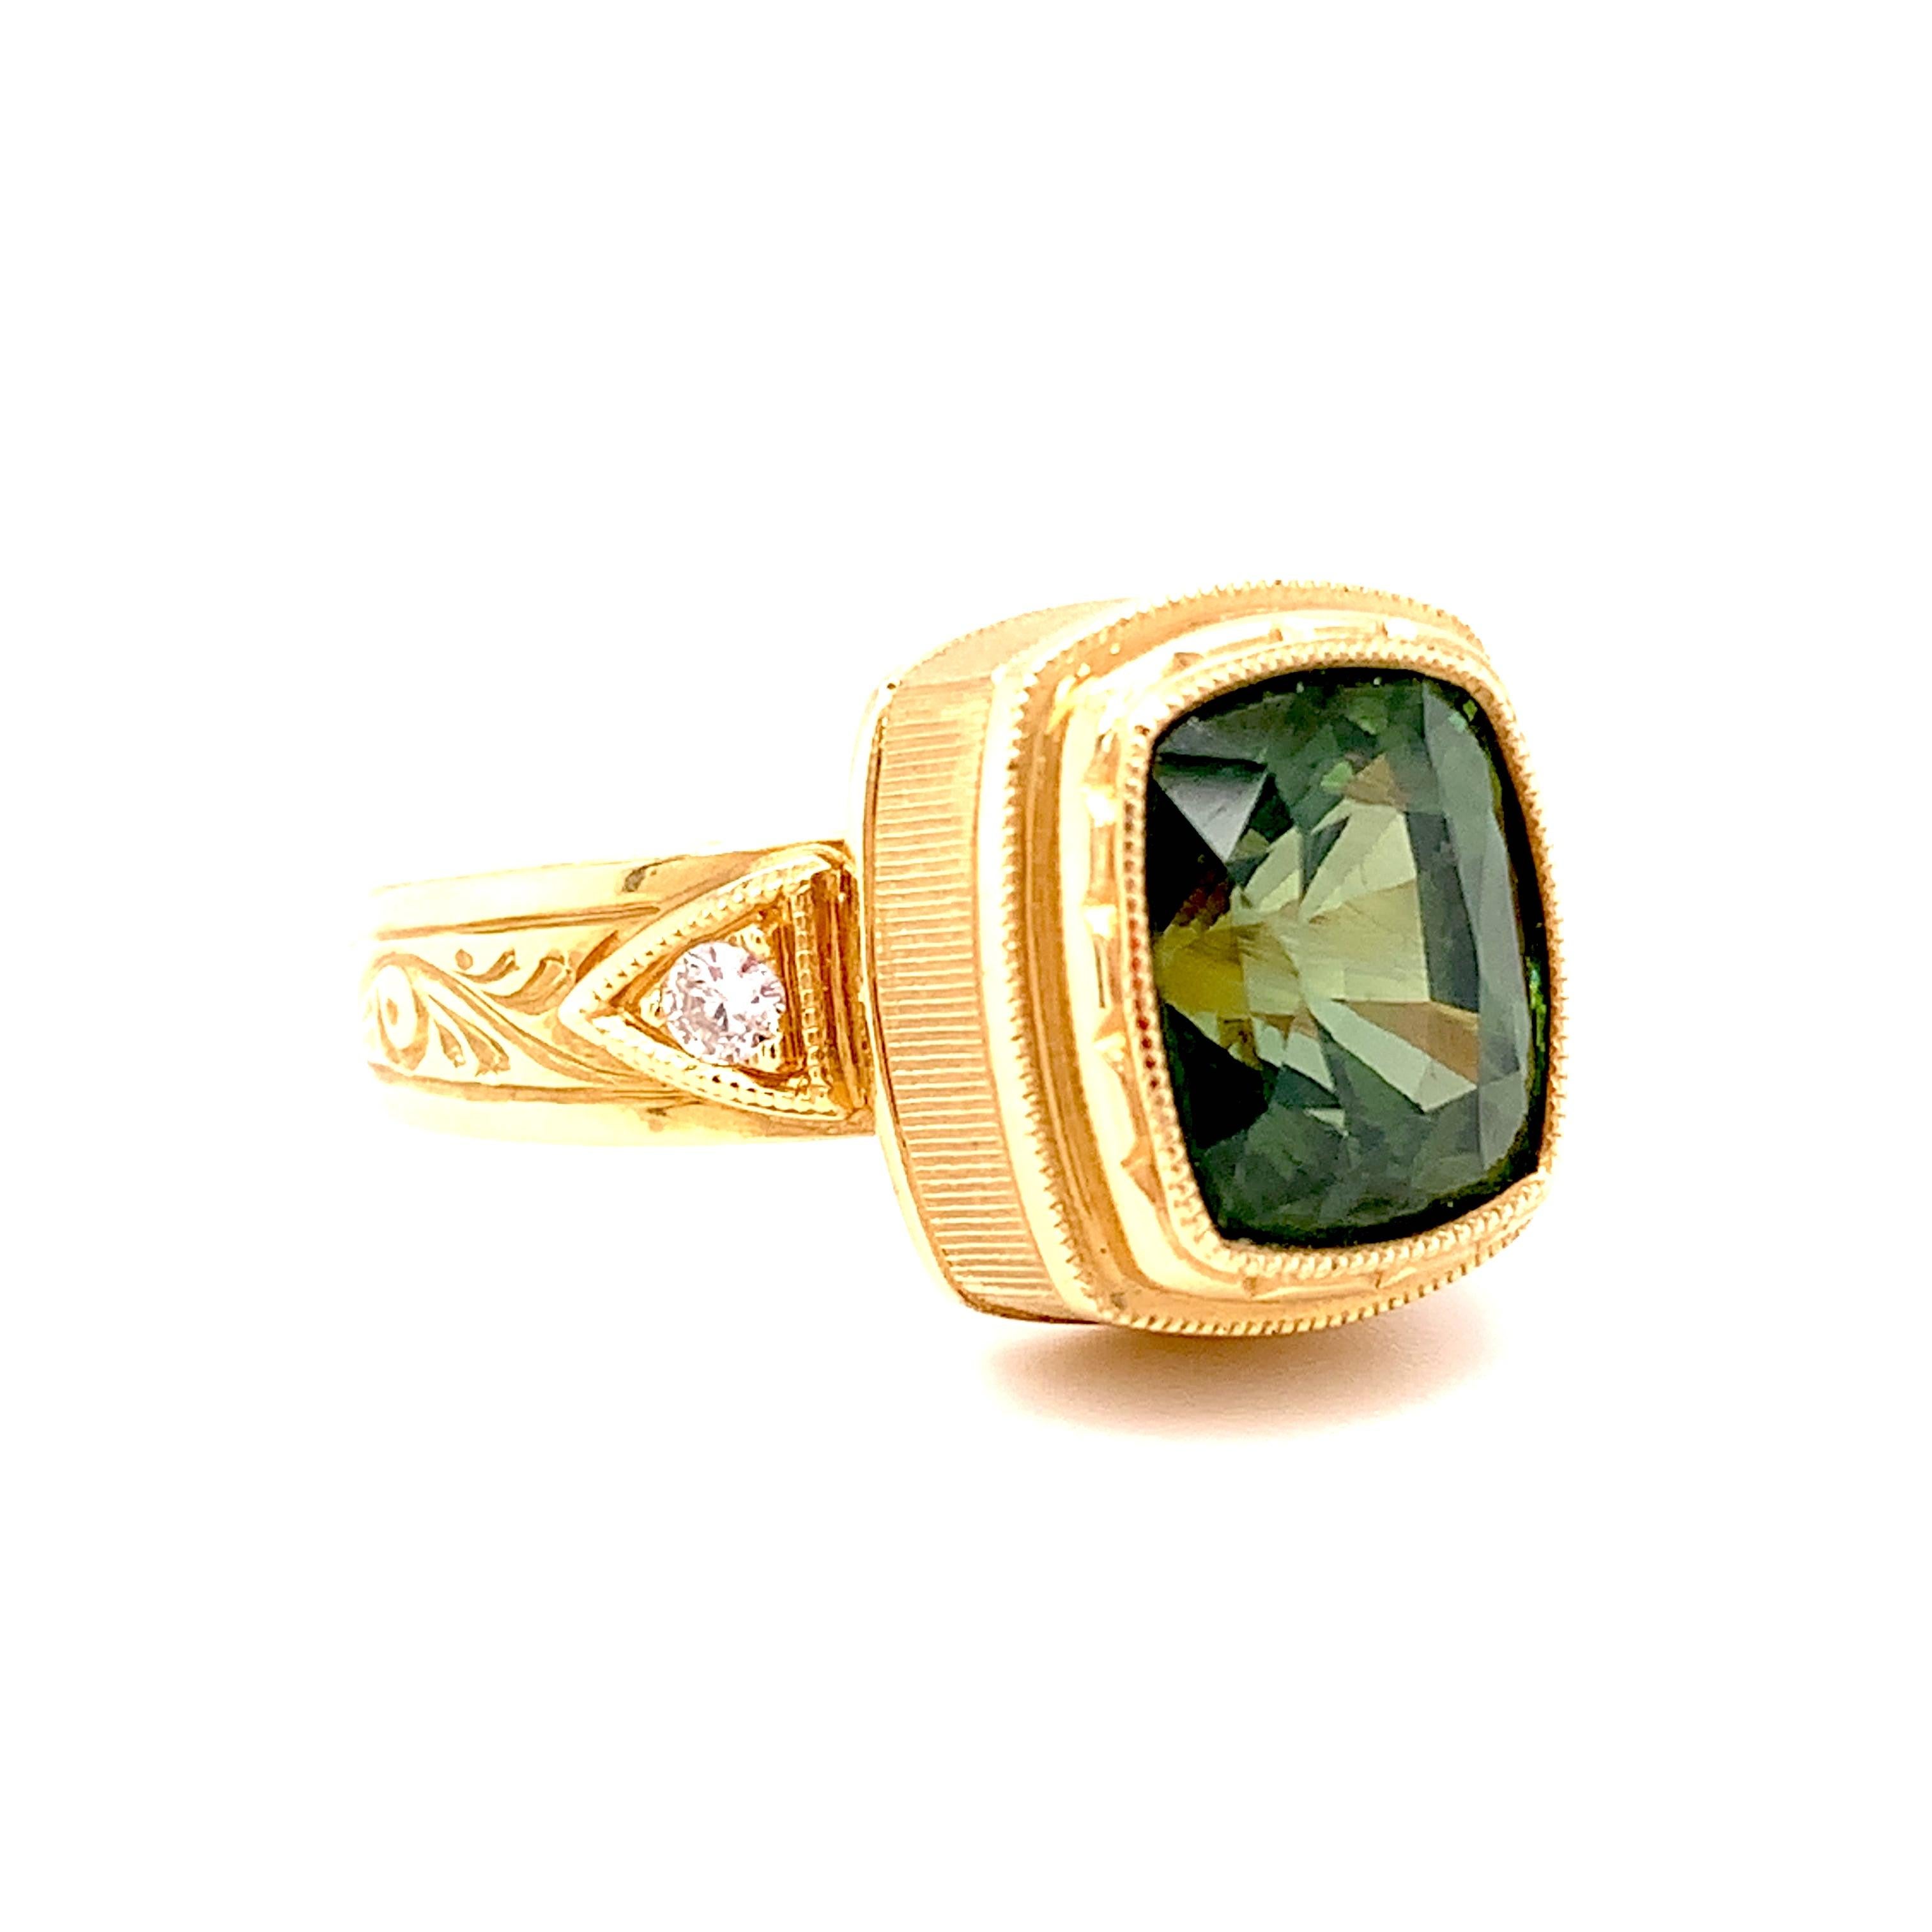 Cushion Cut 5.38 ct. Green Zircon and Diamond Engraved Band Ring in 18k Yellow Gold For Sale